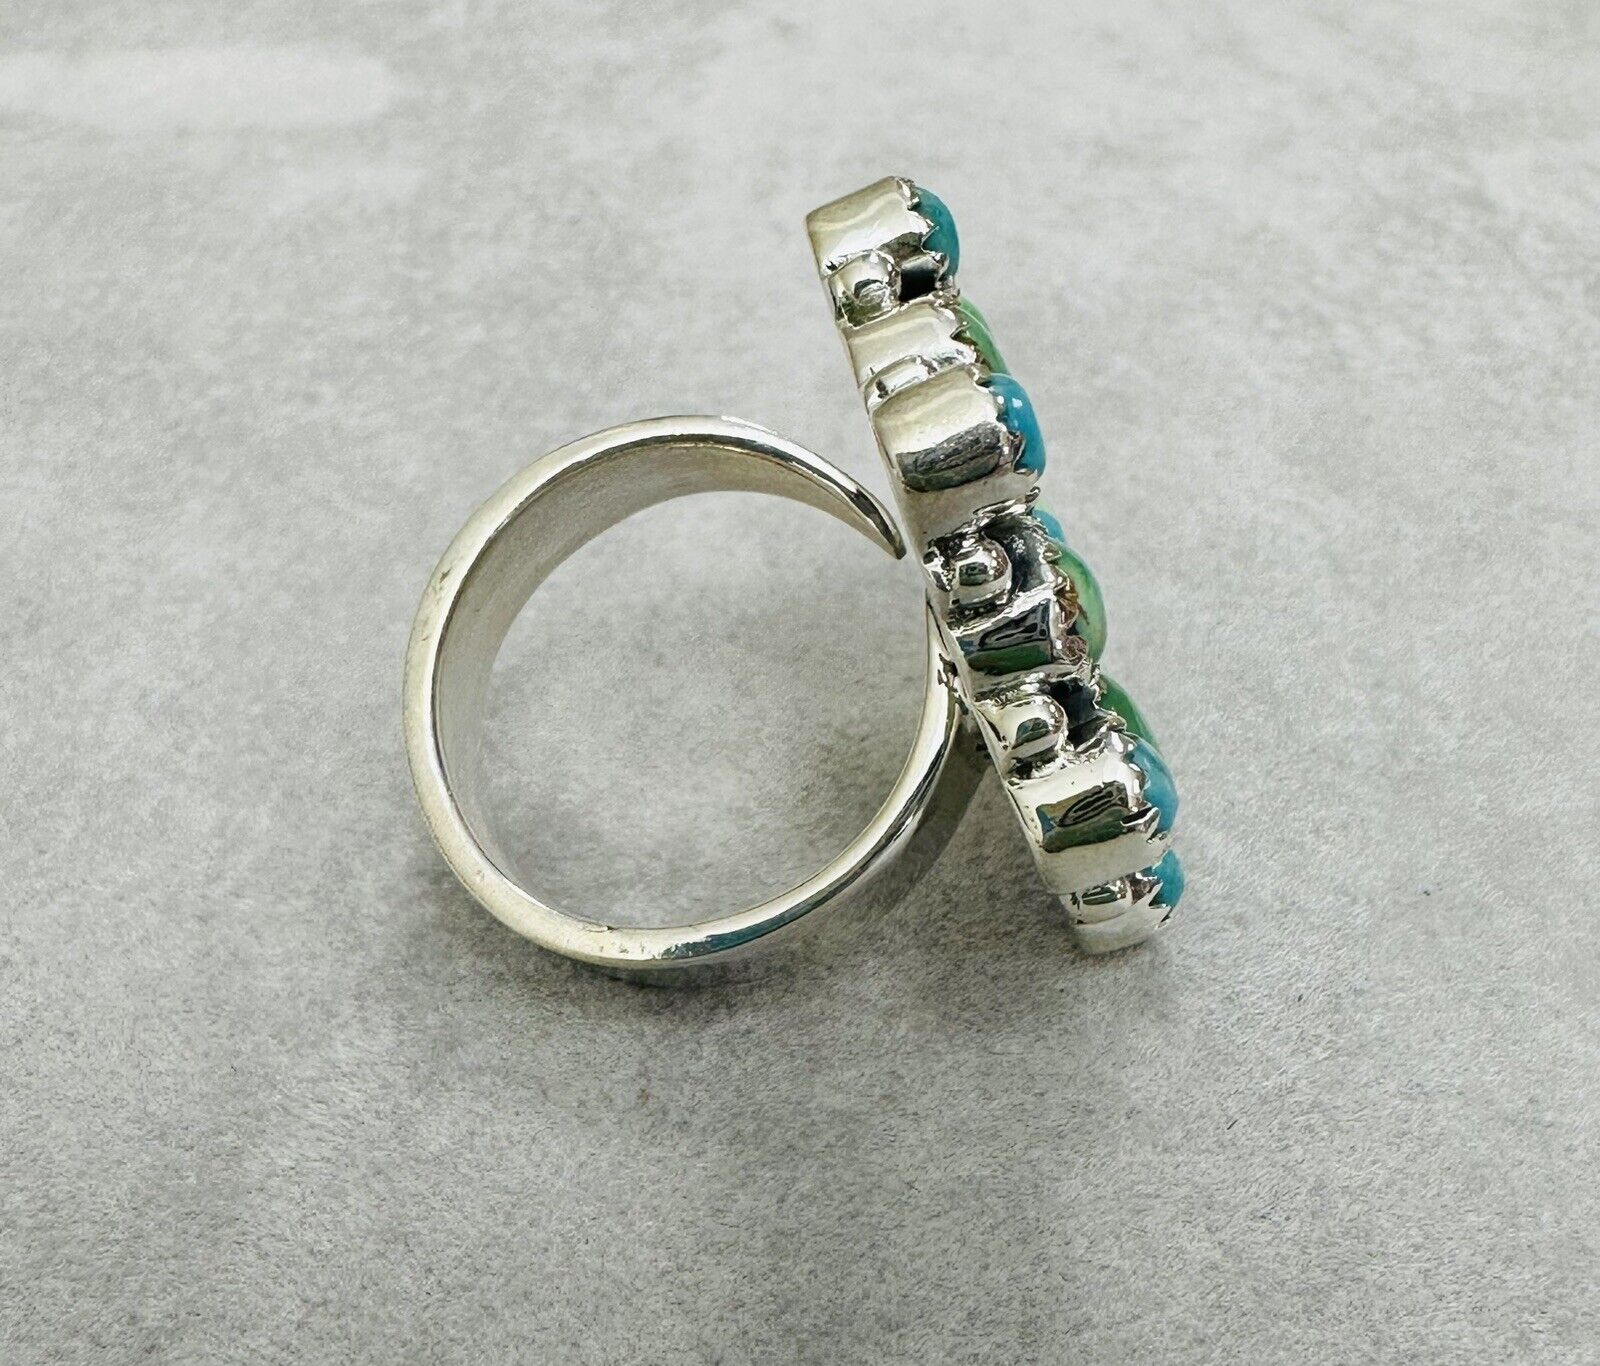 Turquoise And Variscite Gemstone Ring Adjustable 925 Sterling Silver Closed Back